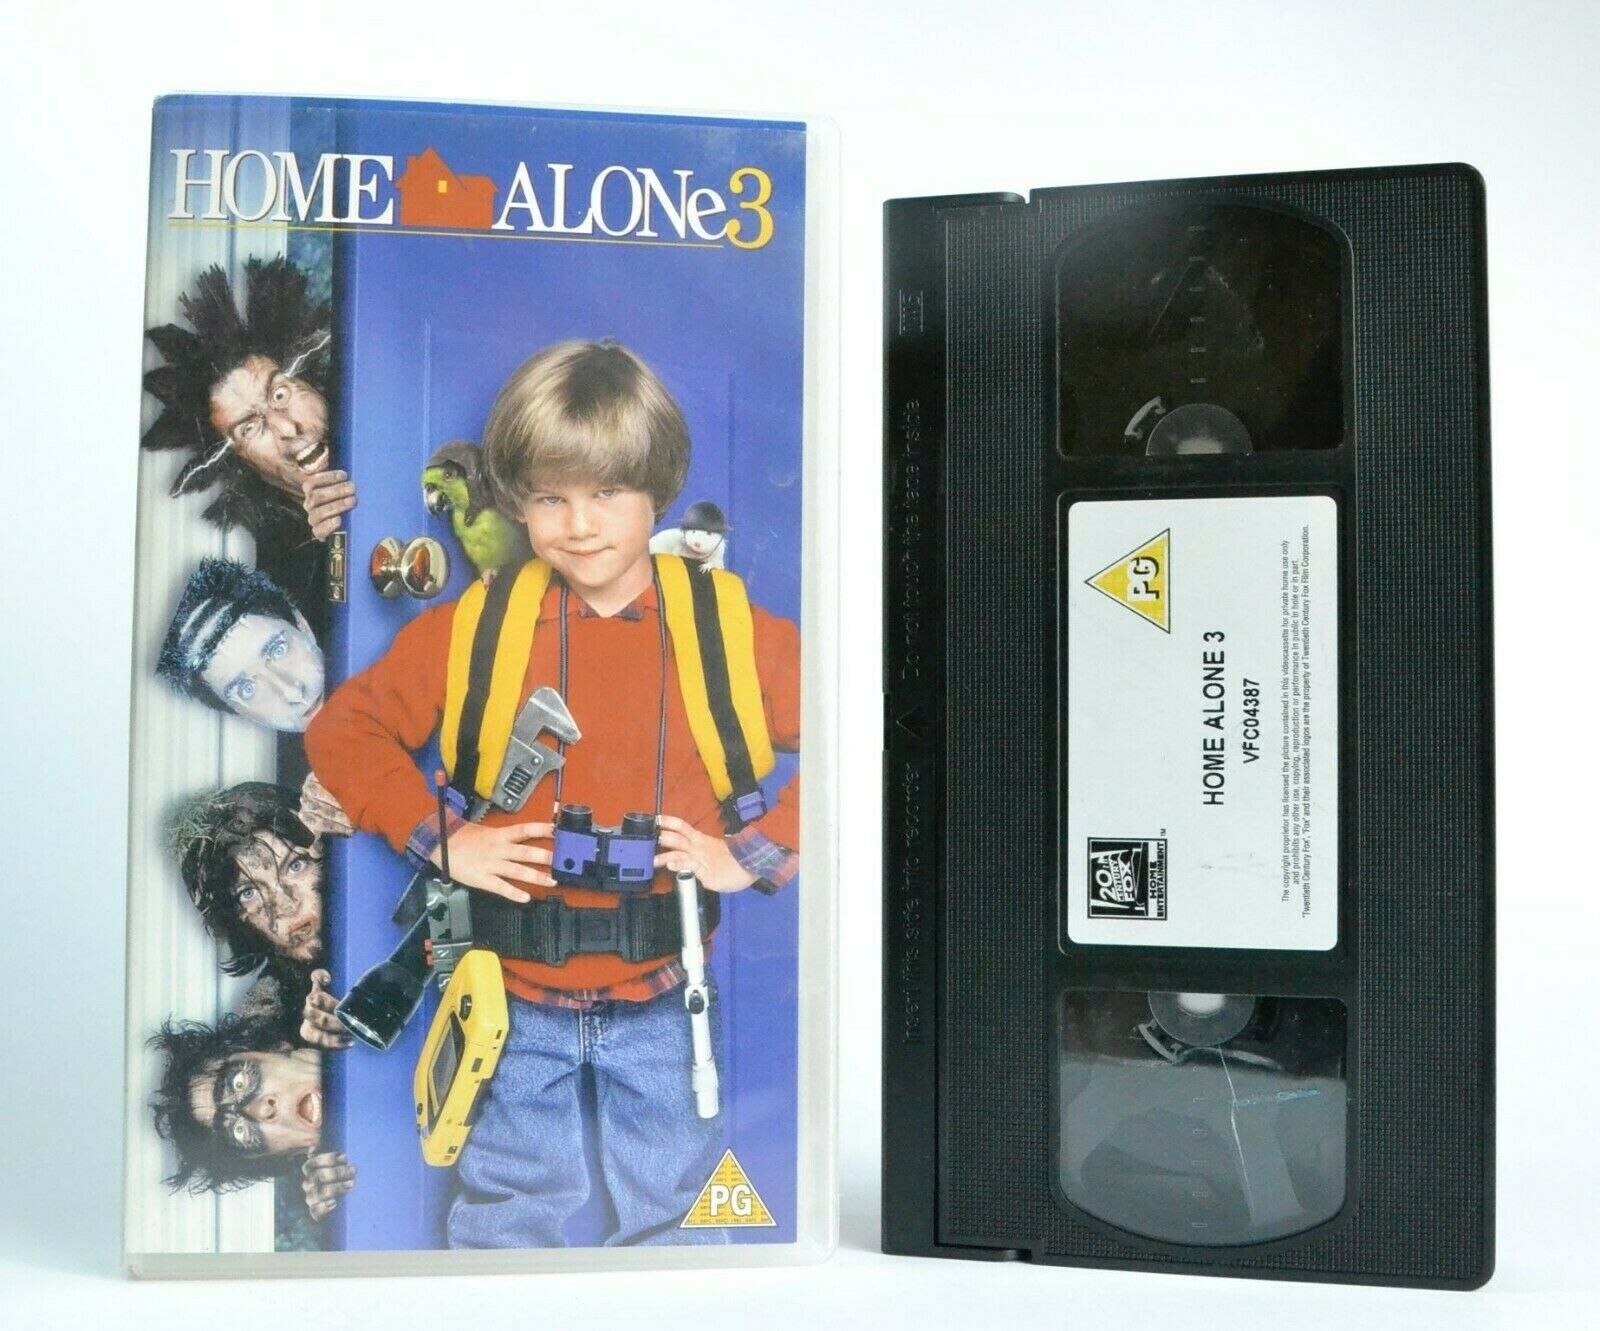 Home Alone 3 (1997): Family Comedy - A Boy In Big Trouble - Children's - Pal VHS-